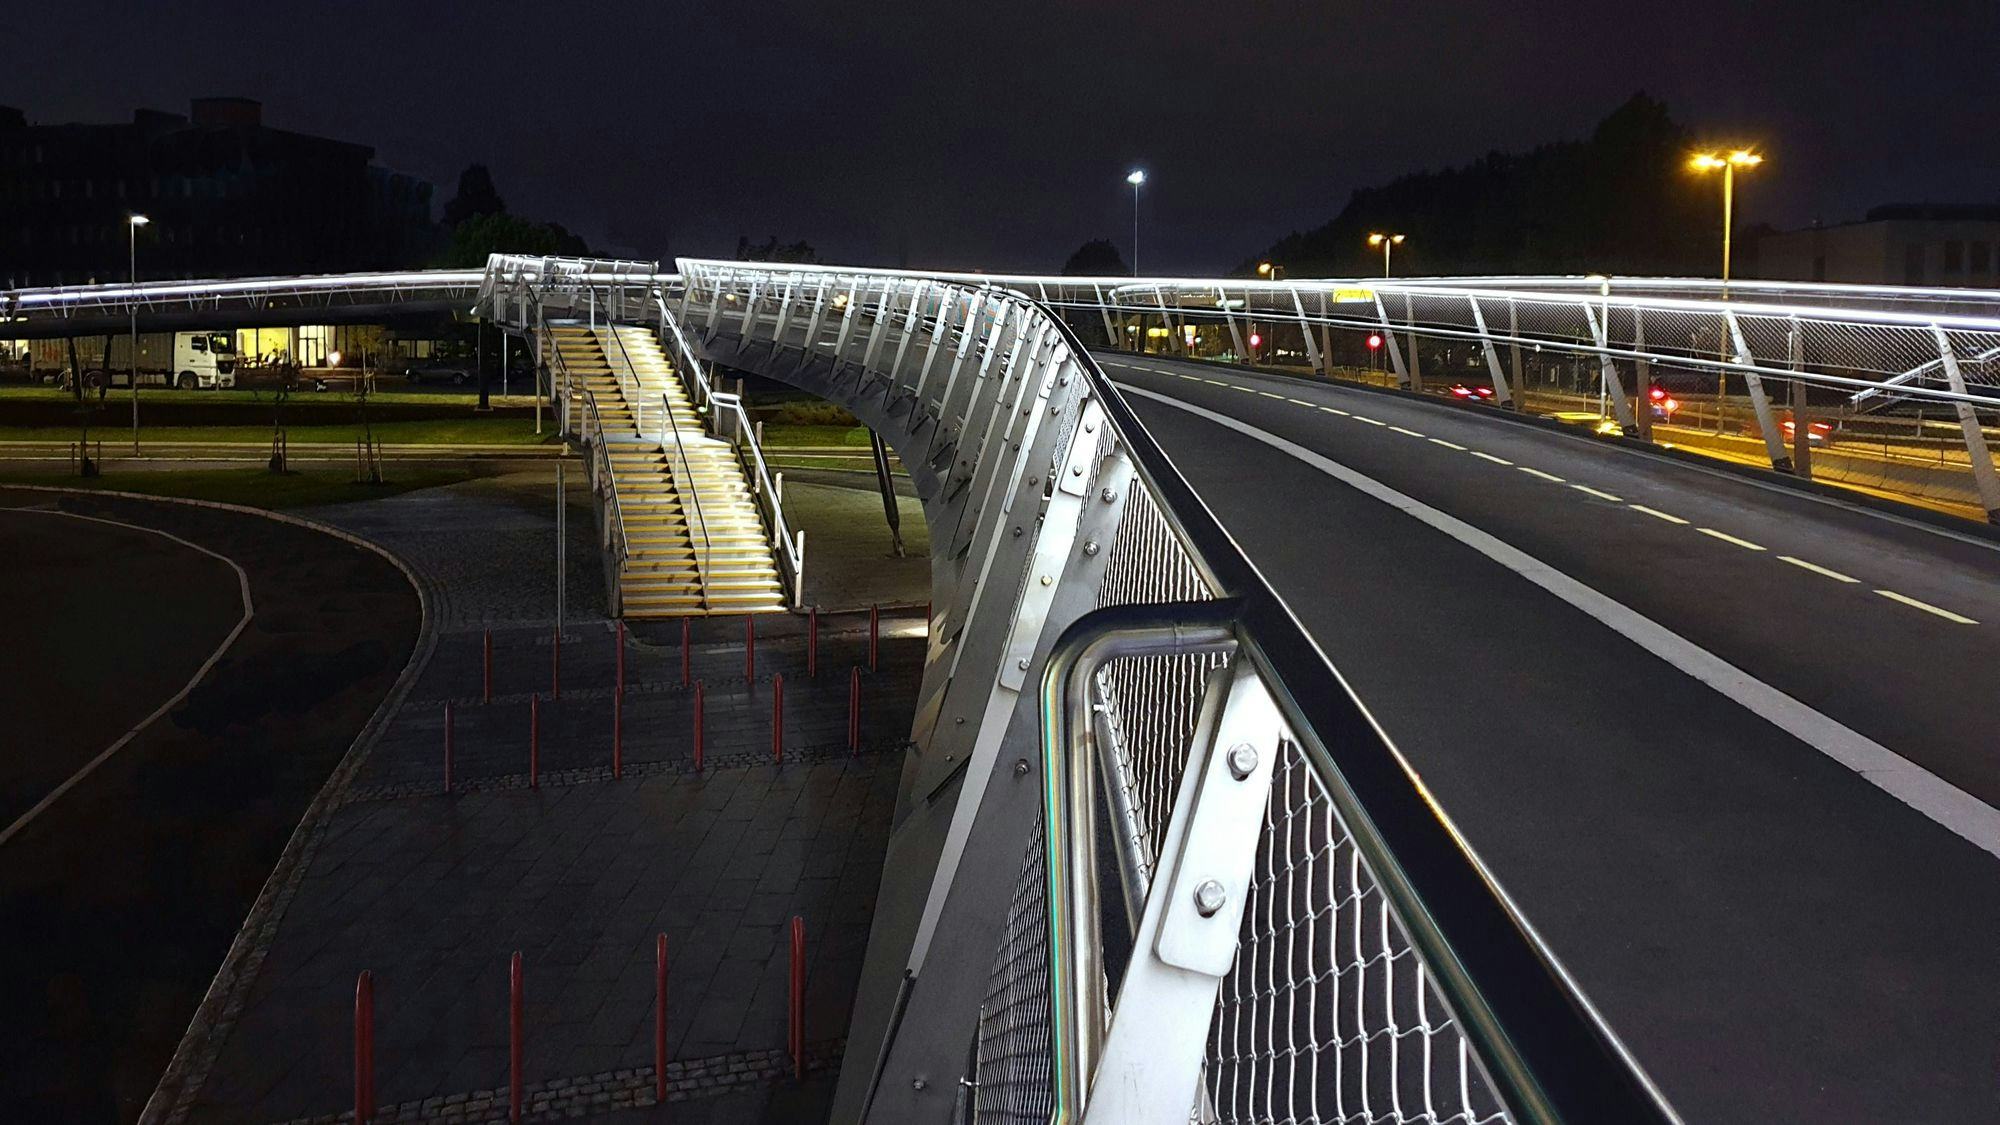 An illuminated pedestrian bridge at night, curving over a road with passing vehicles 